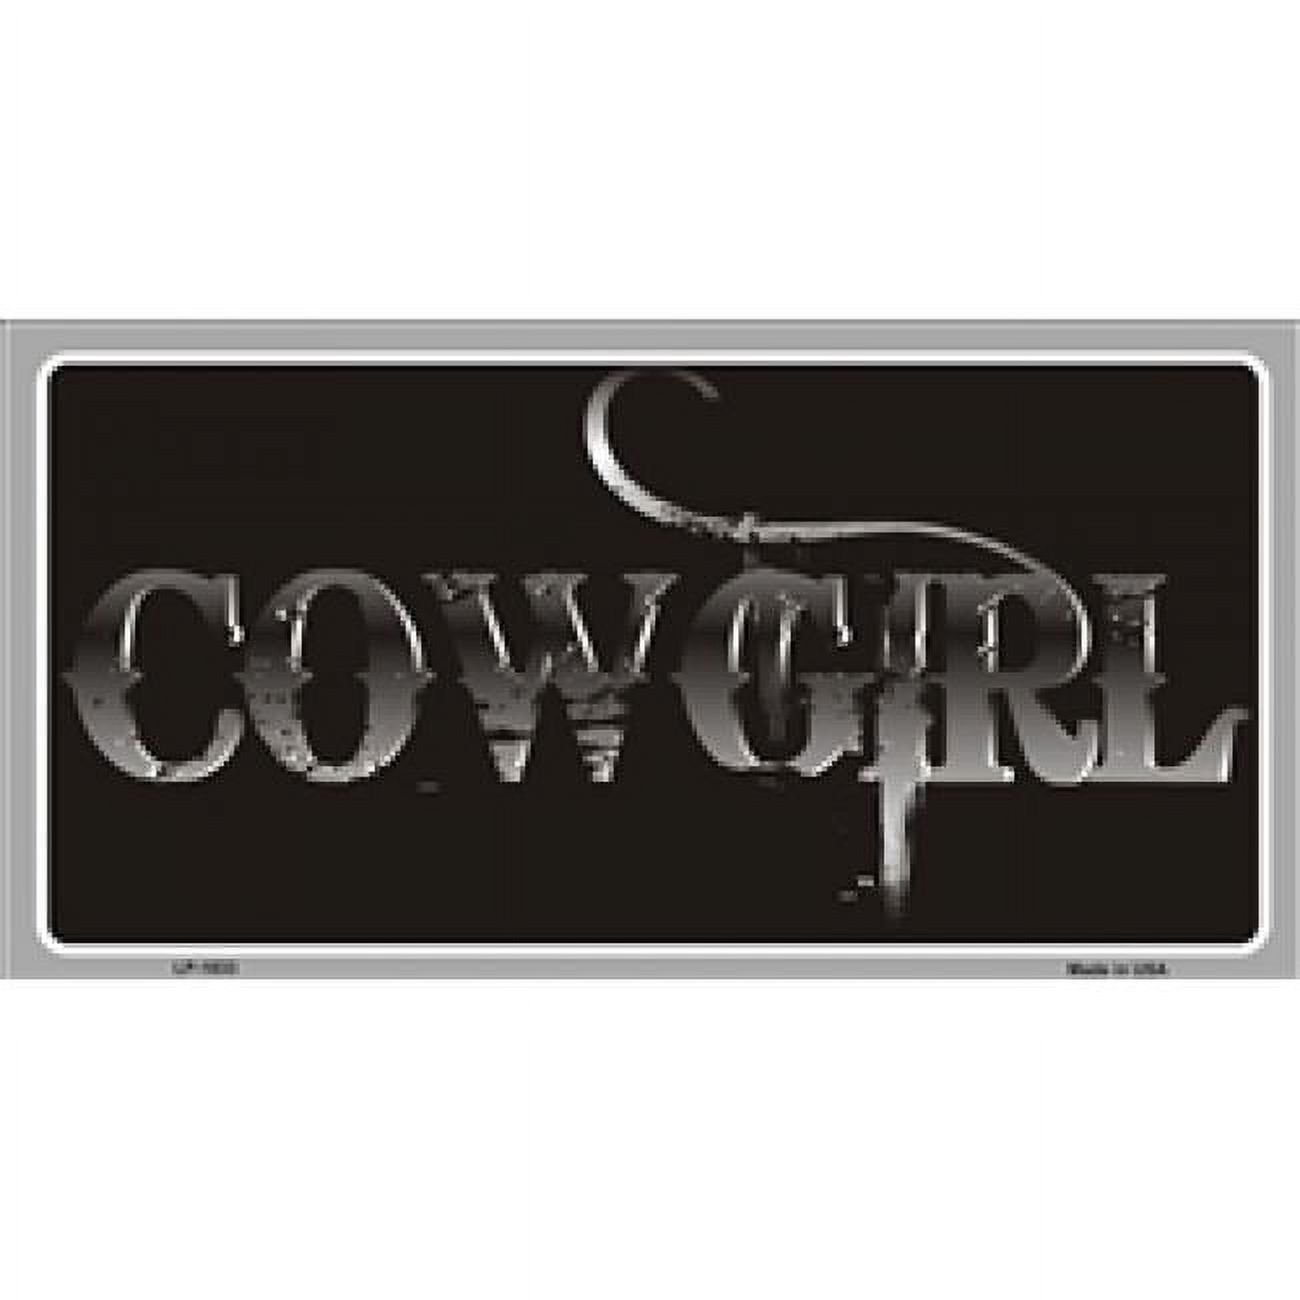 212 Main LP-1833 6 x 12 in. Cowgirl License Plate - image 1 of 2